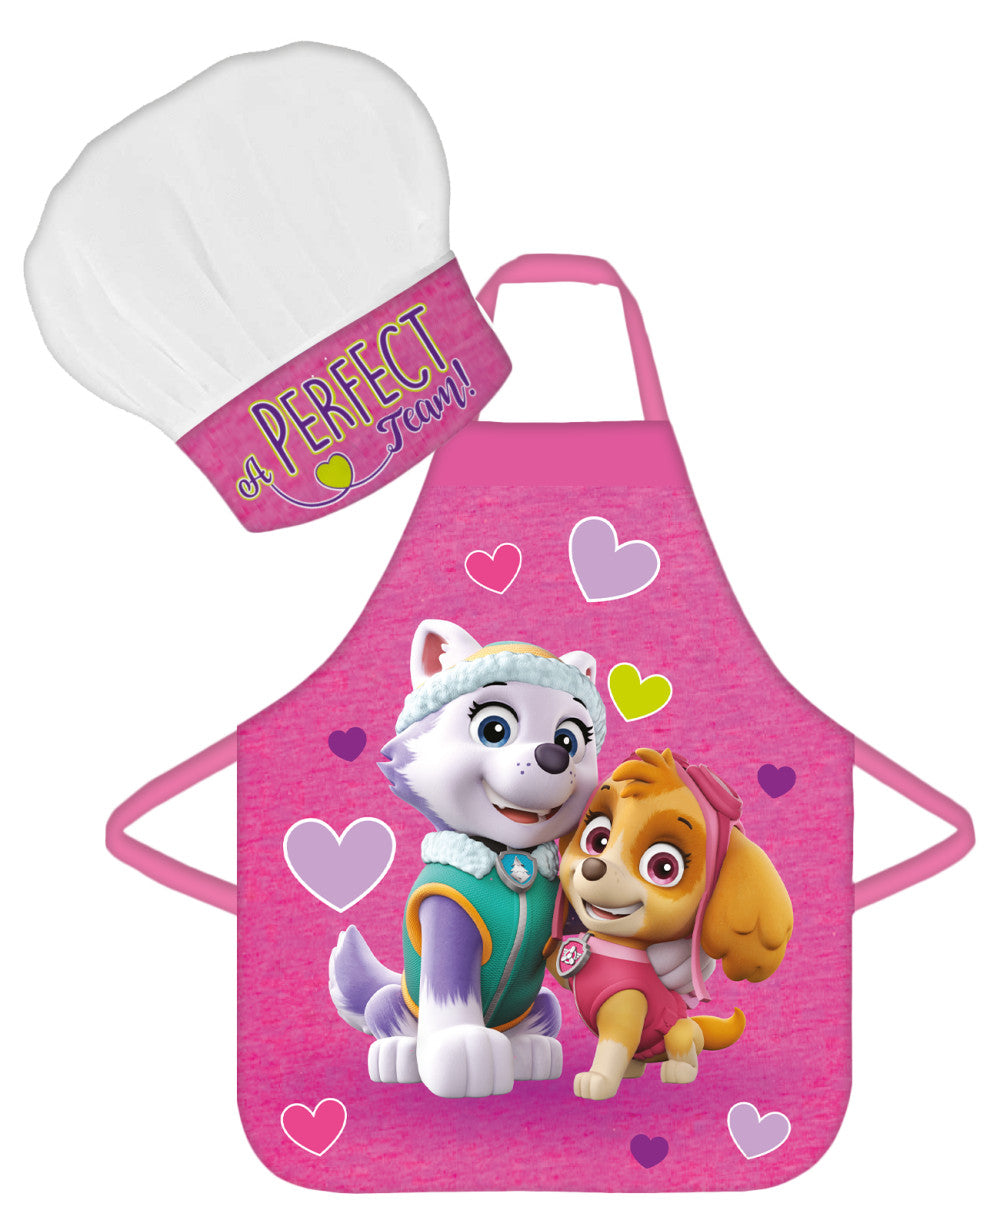 Paw Patrol Pups Skye Apron and Chef Hat Set. Everest Snow Rescue Dog